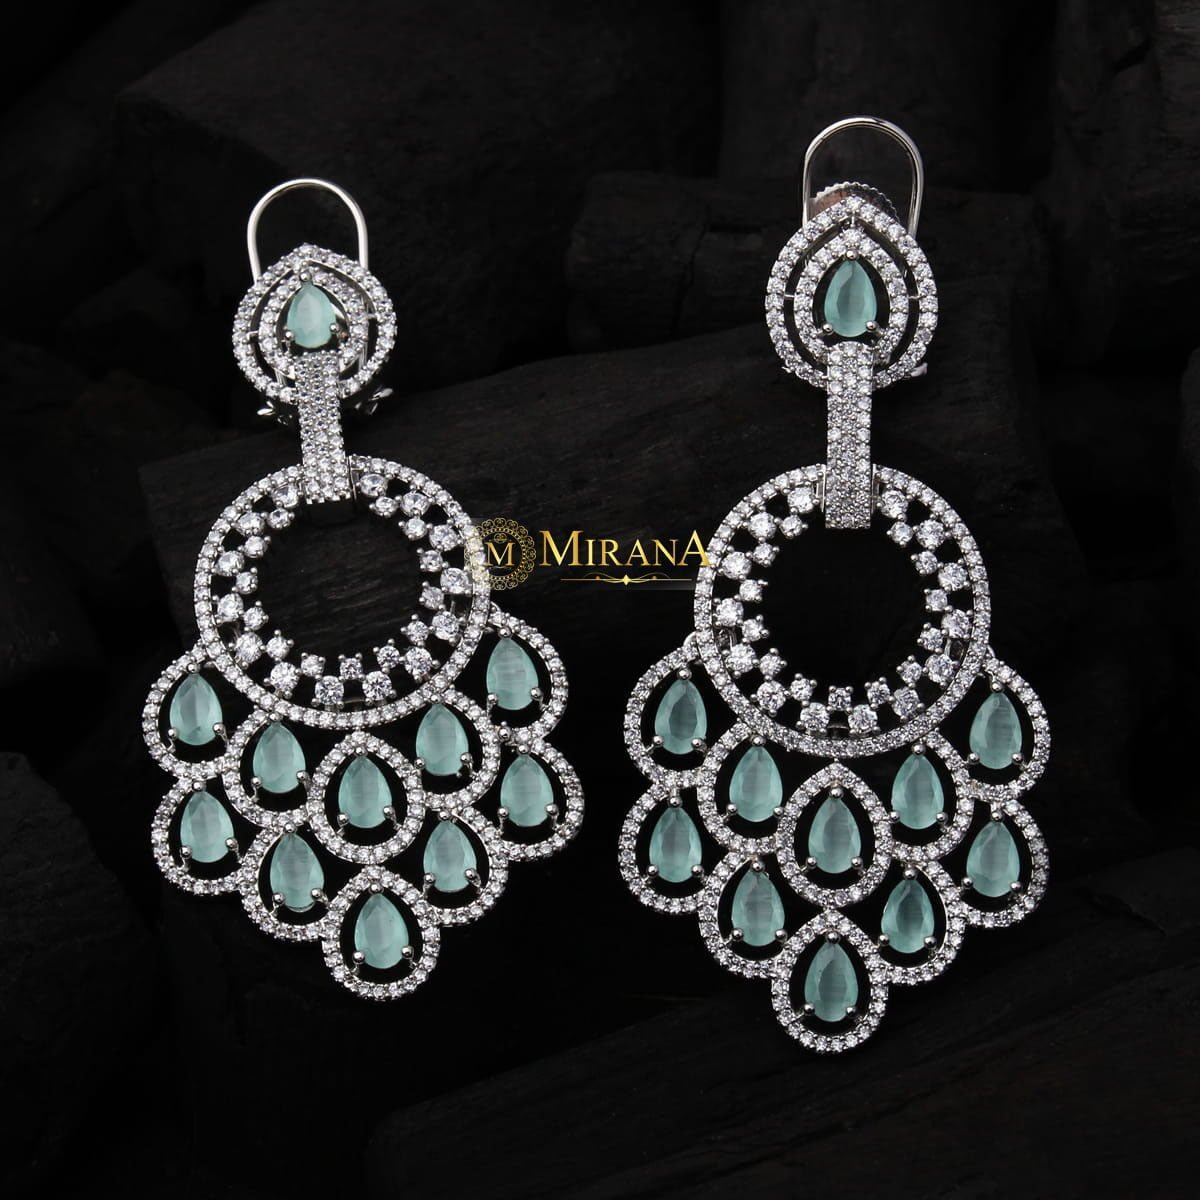 Peacock Blue Earrings for Gown | FashionCrab.com